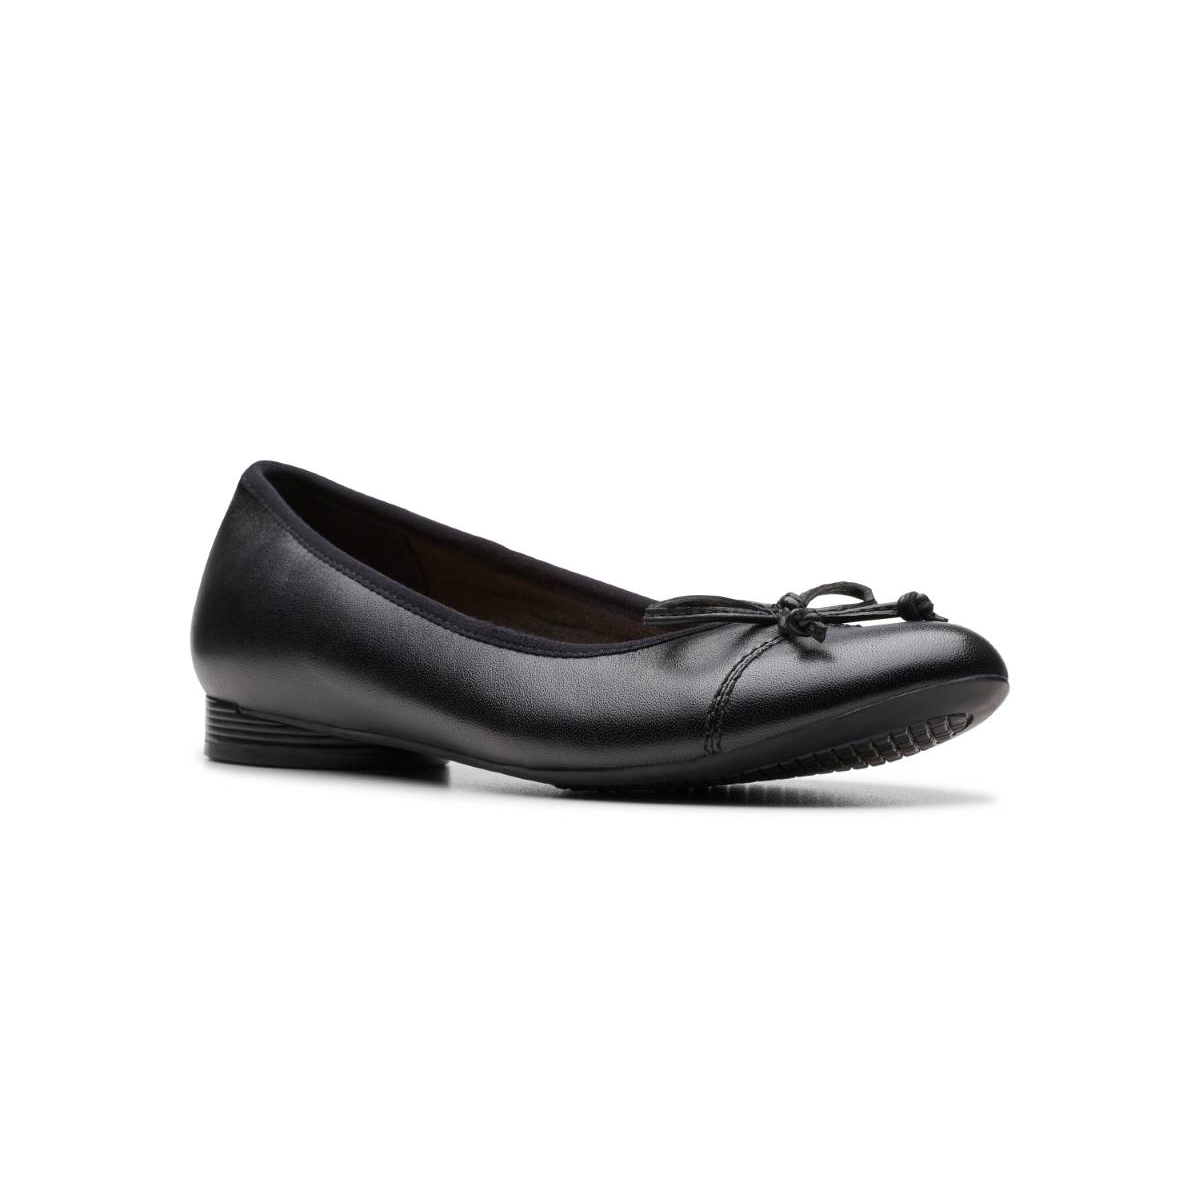 Clarks Loreleigh Rae Black leather Womens pumps 7735-34D in a Plain Leather in Size 8